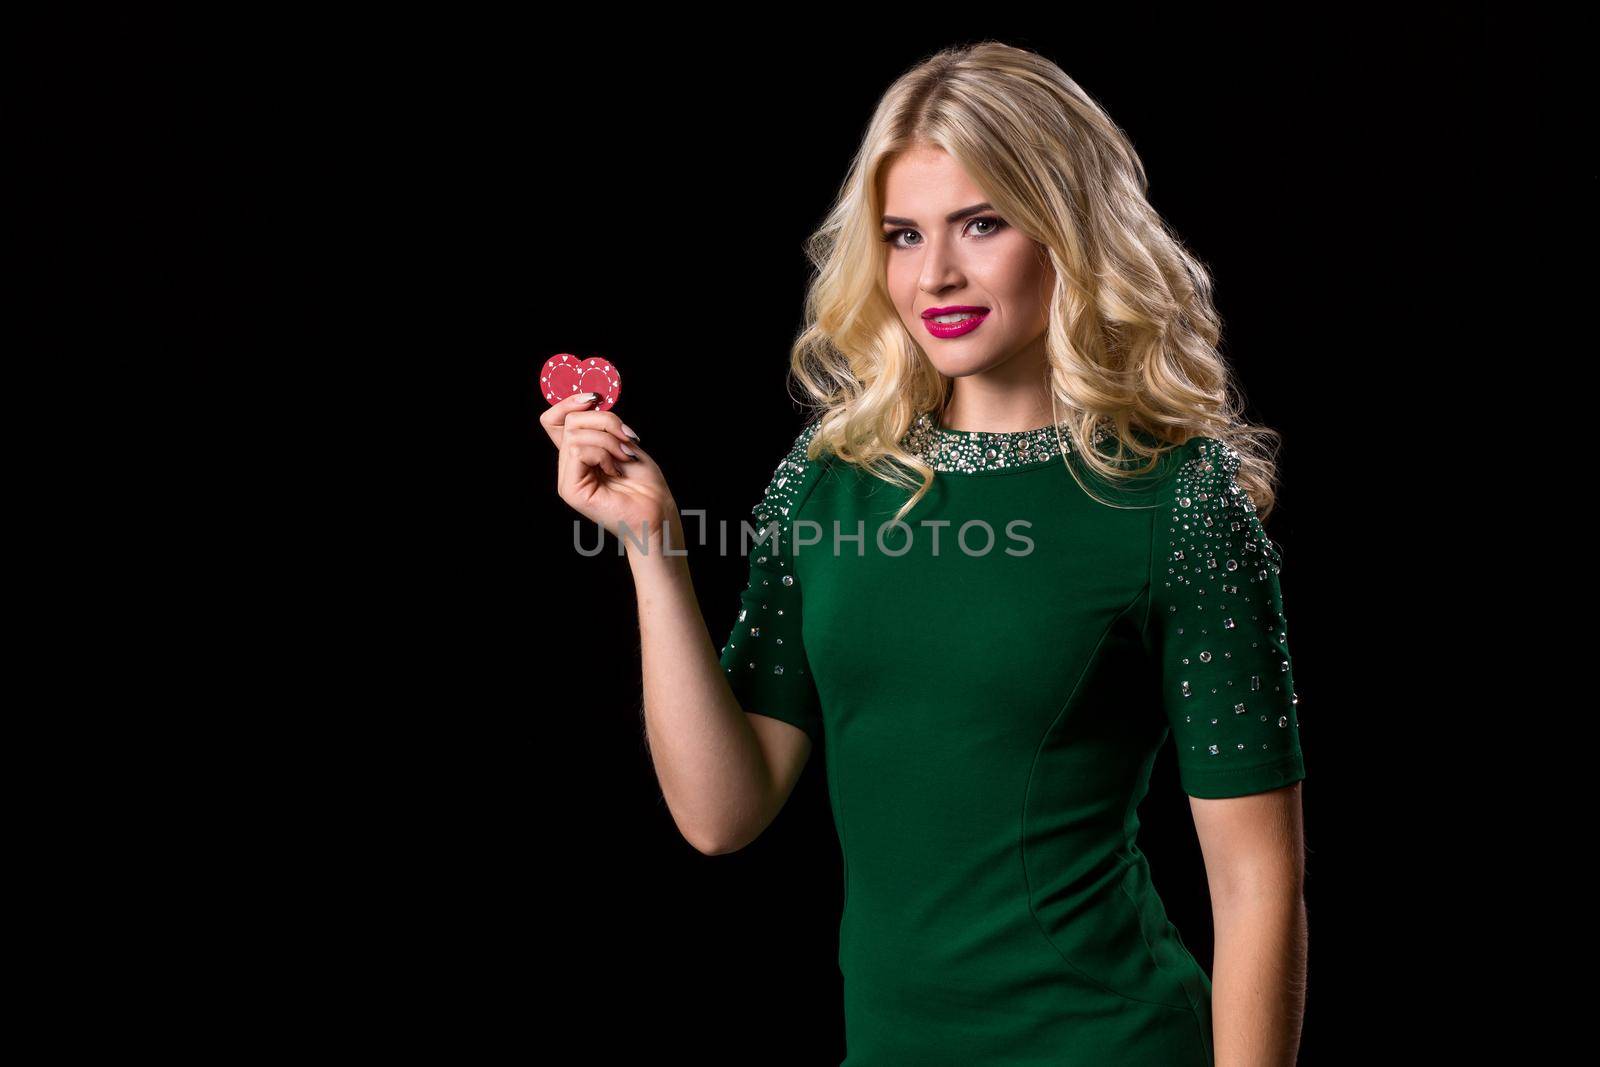 blonde woman posing with chips for gambling by nazarovsergey